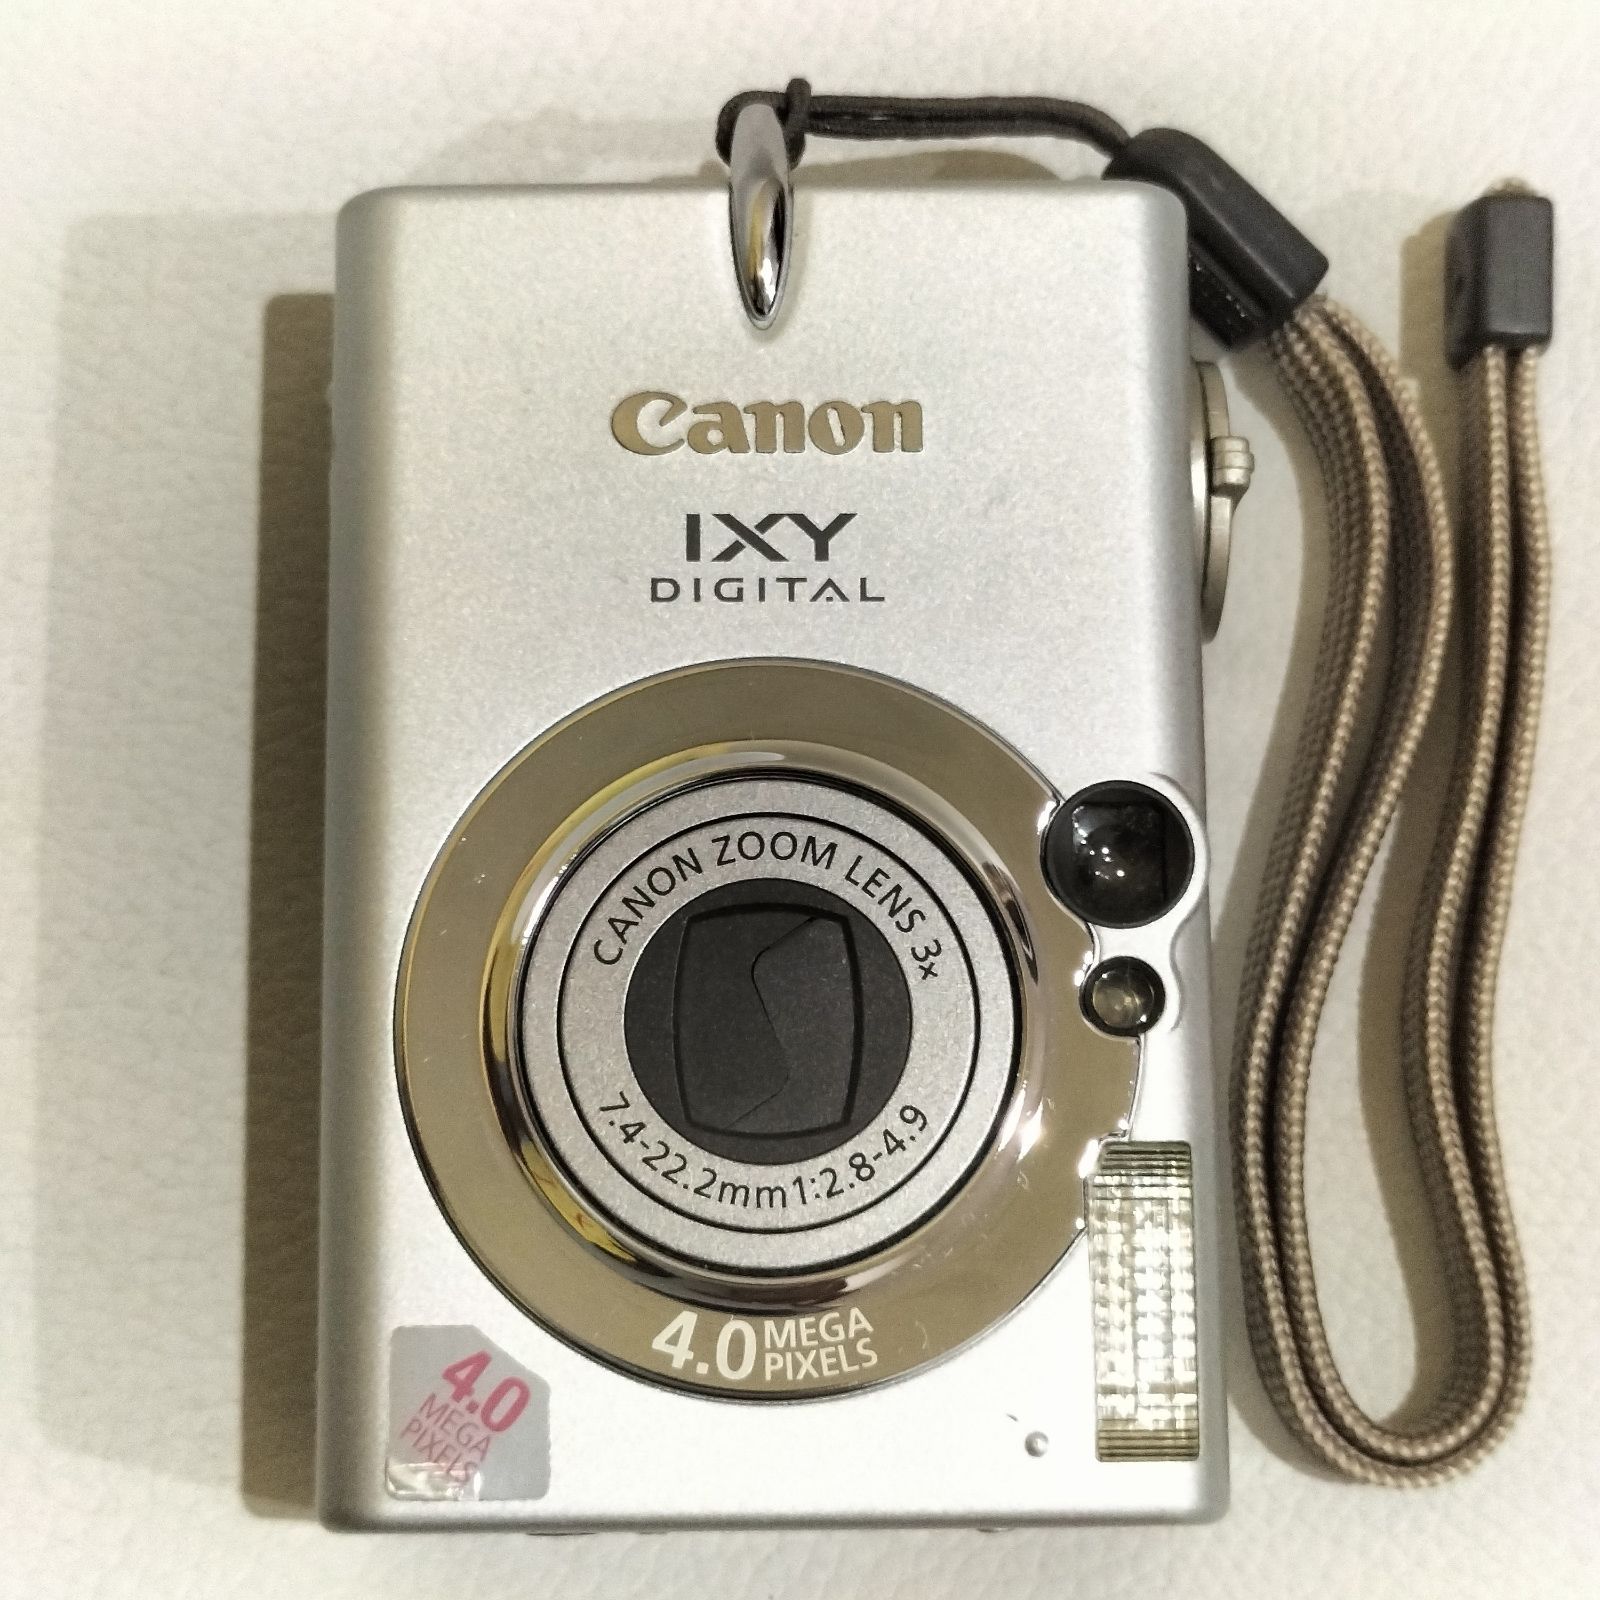 IXY30S（レッド）Canon デジカメ  純正予備バッテリー、充電器付きIXY30S